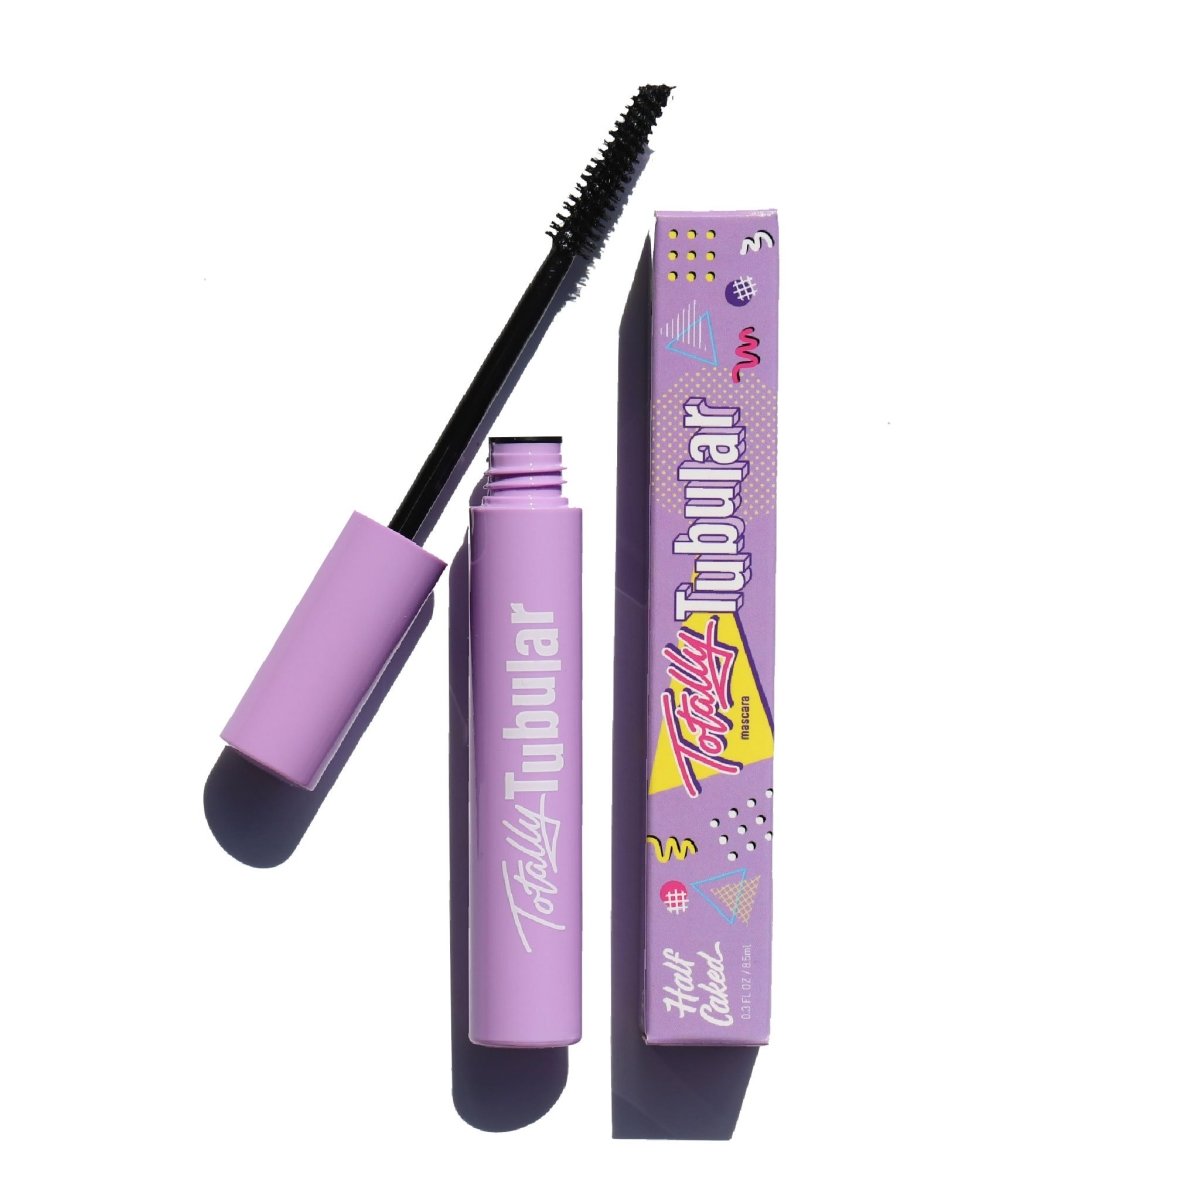 open purple mascara tube with black wire cone applicator and box - totally tubular bundle, the dream - half caked makeup